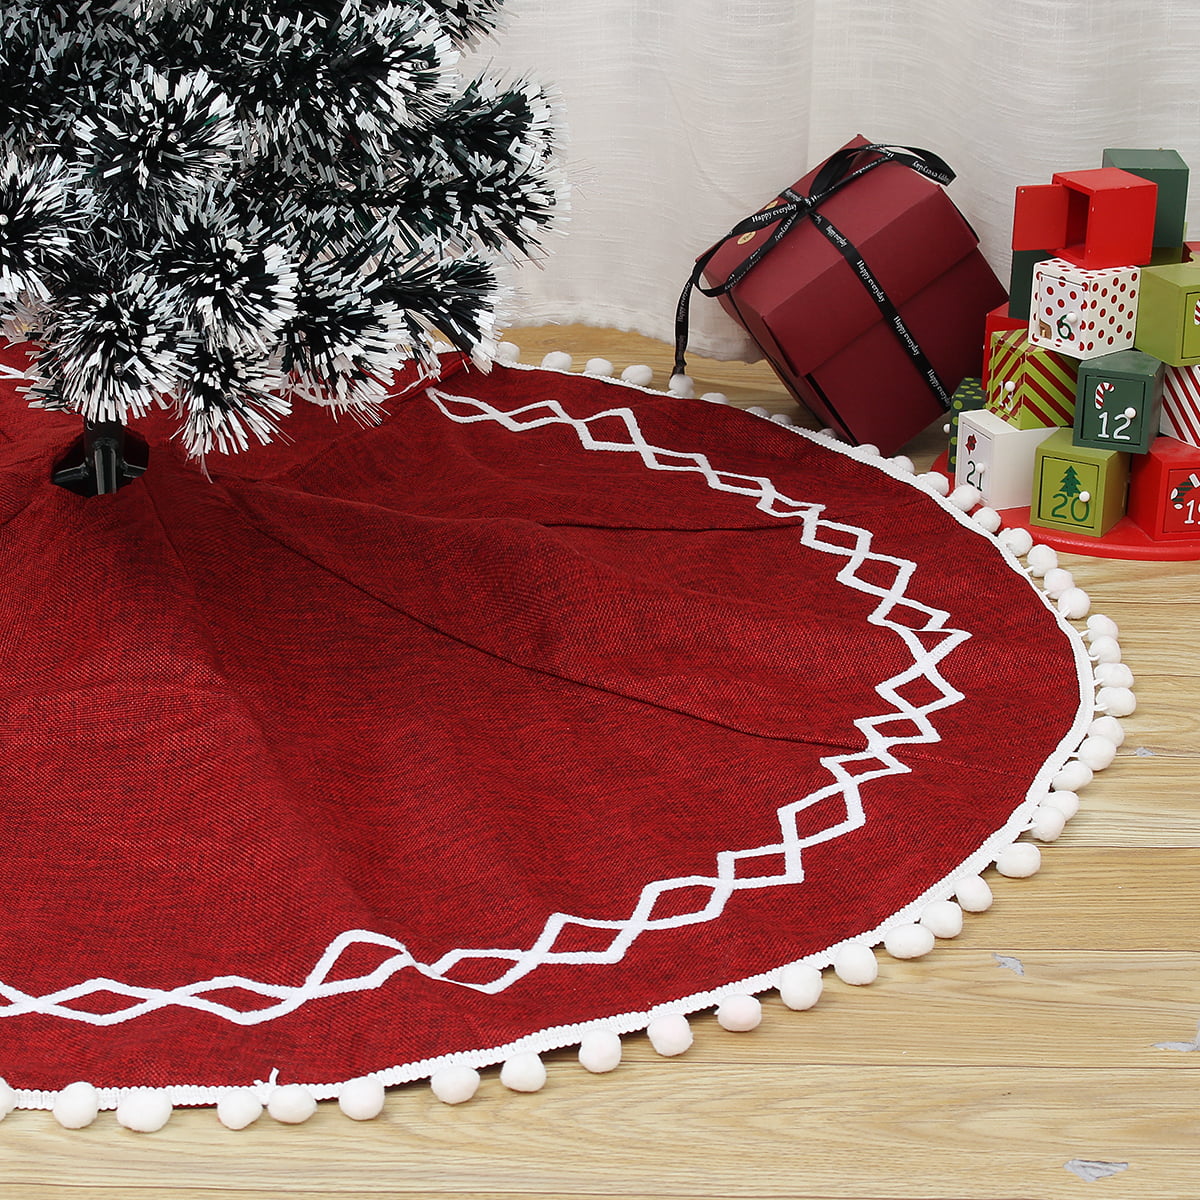 Details about   Ndzhzeo Cat In The Bar Christmas Tree Skirt 48 Inches Xmas Holiday Ornaments For 